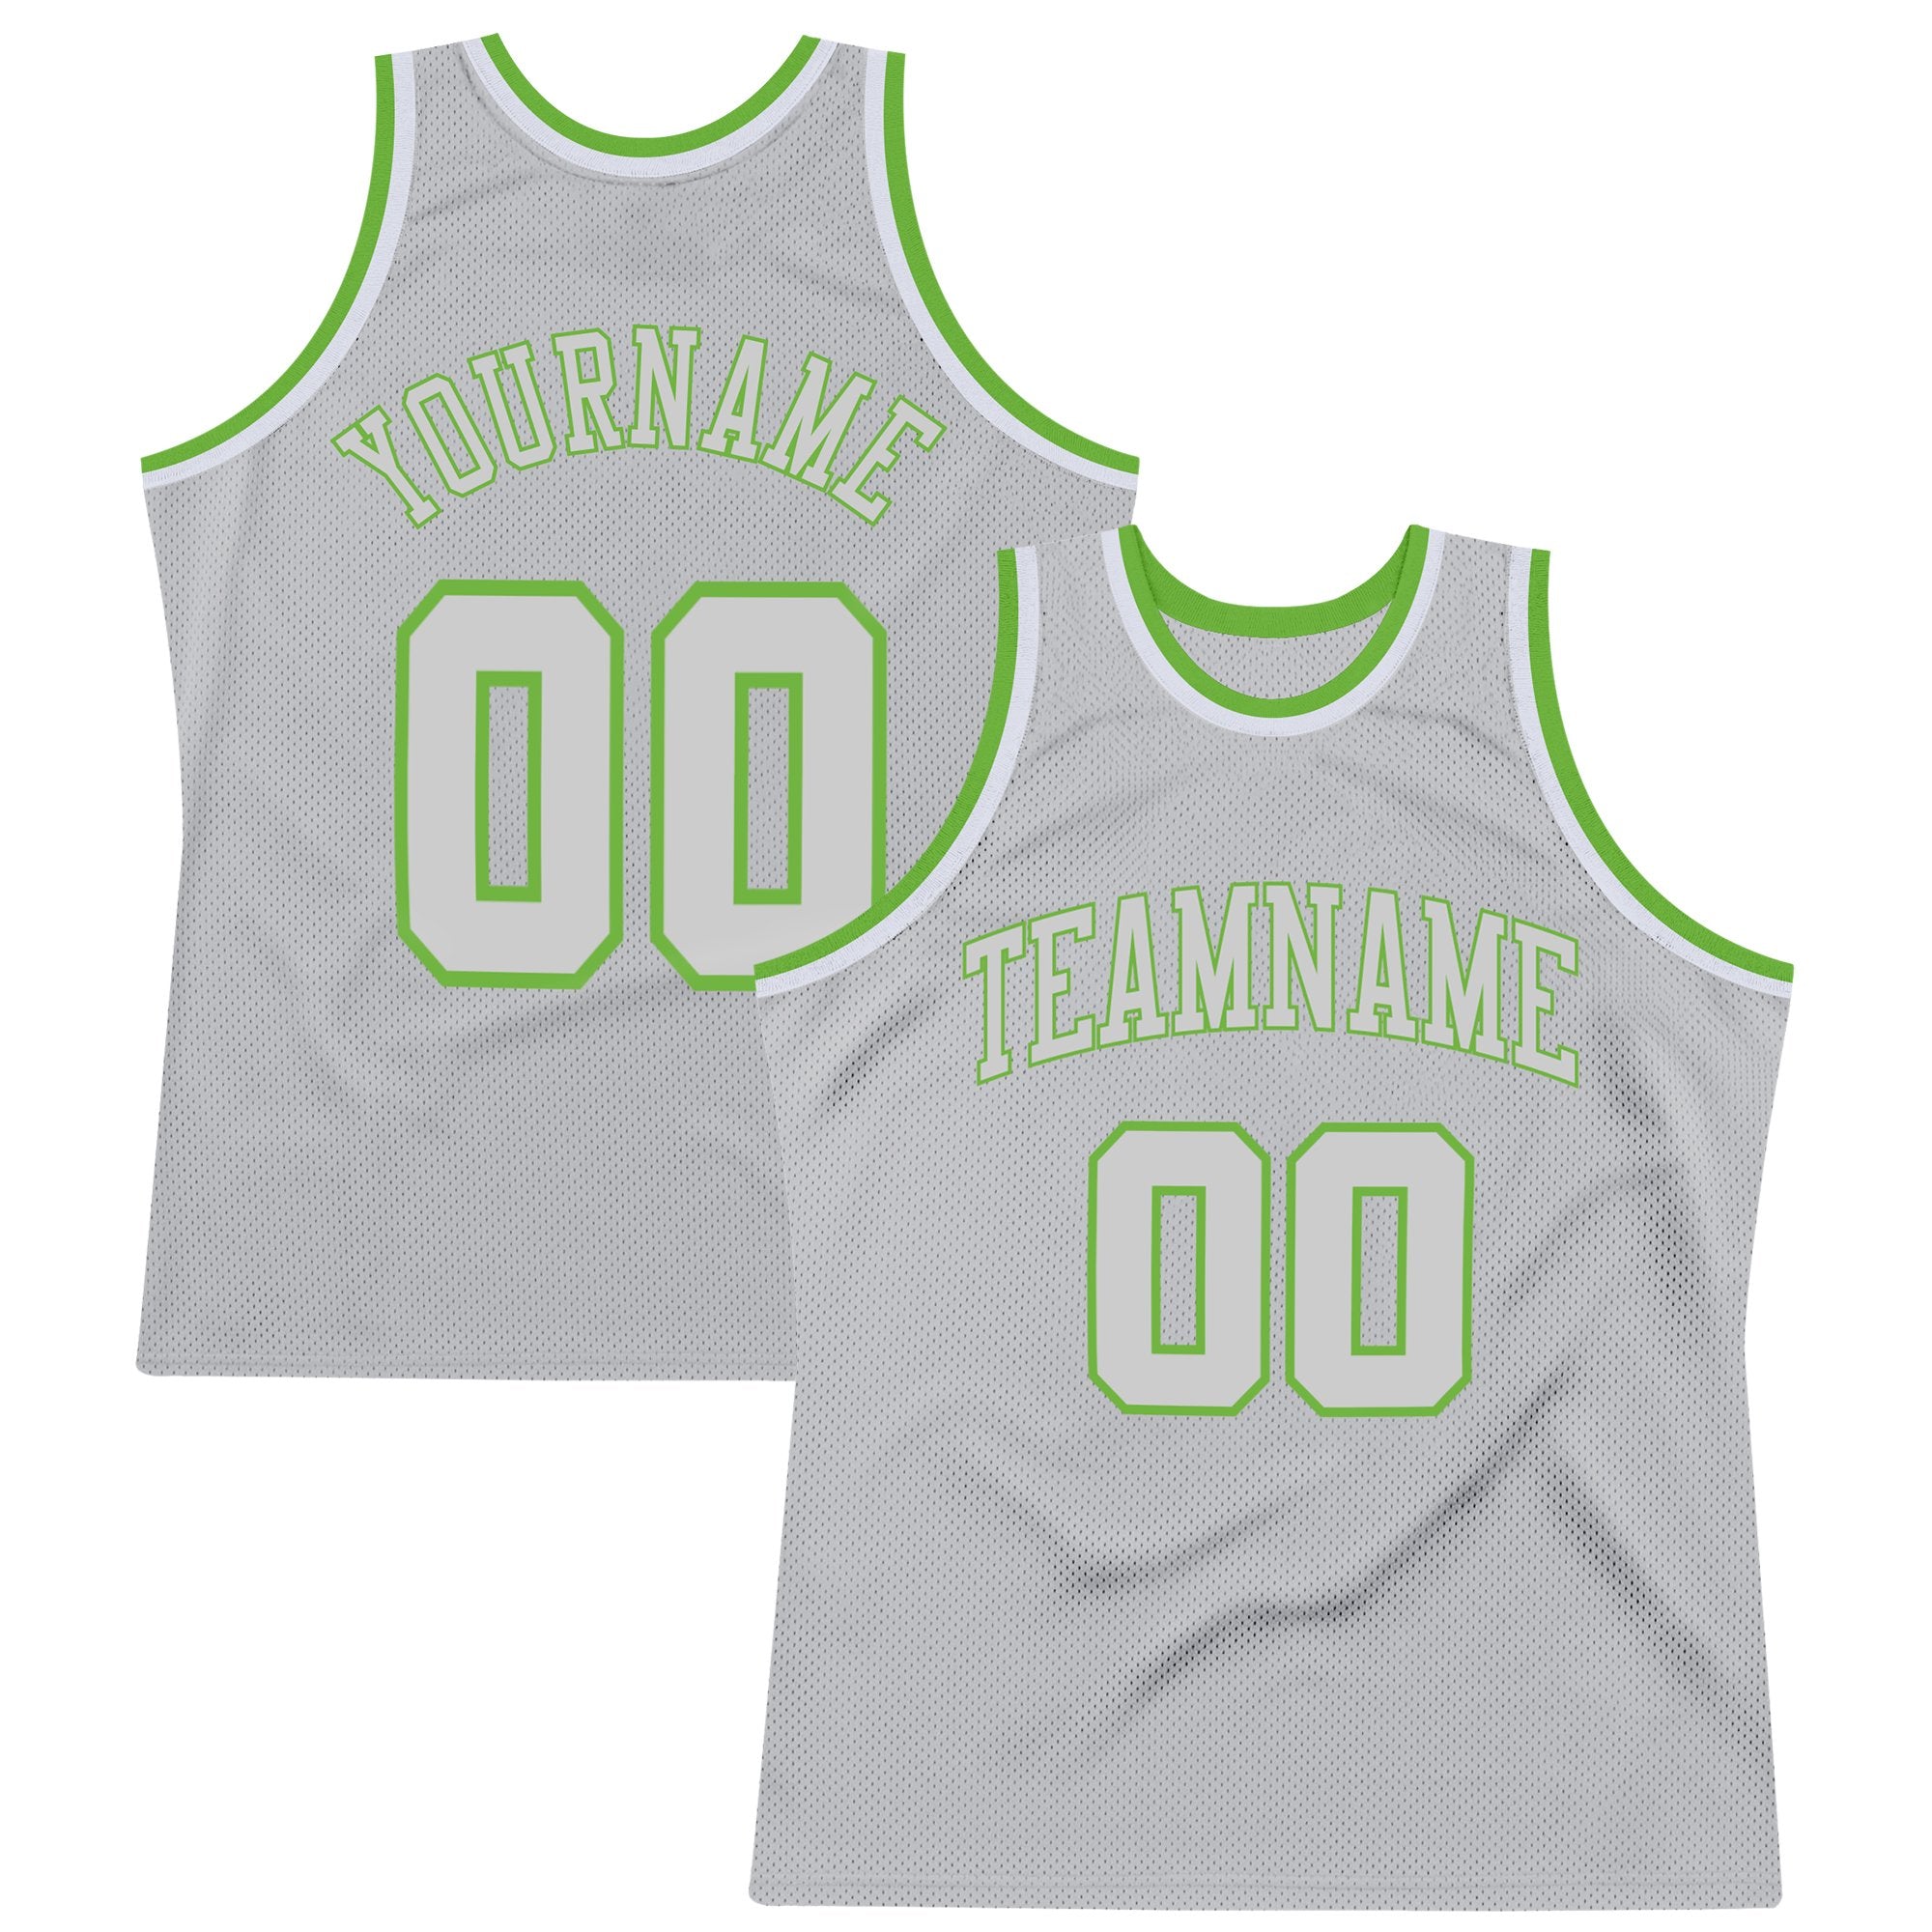 Custom Silver Gray Silver Gray-Neon green Authentic Throwback Basketball Jersey